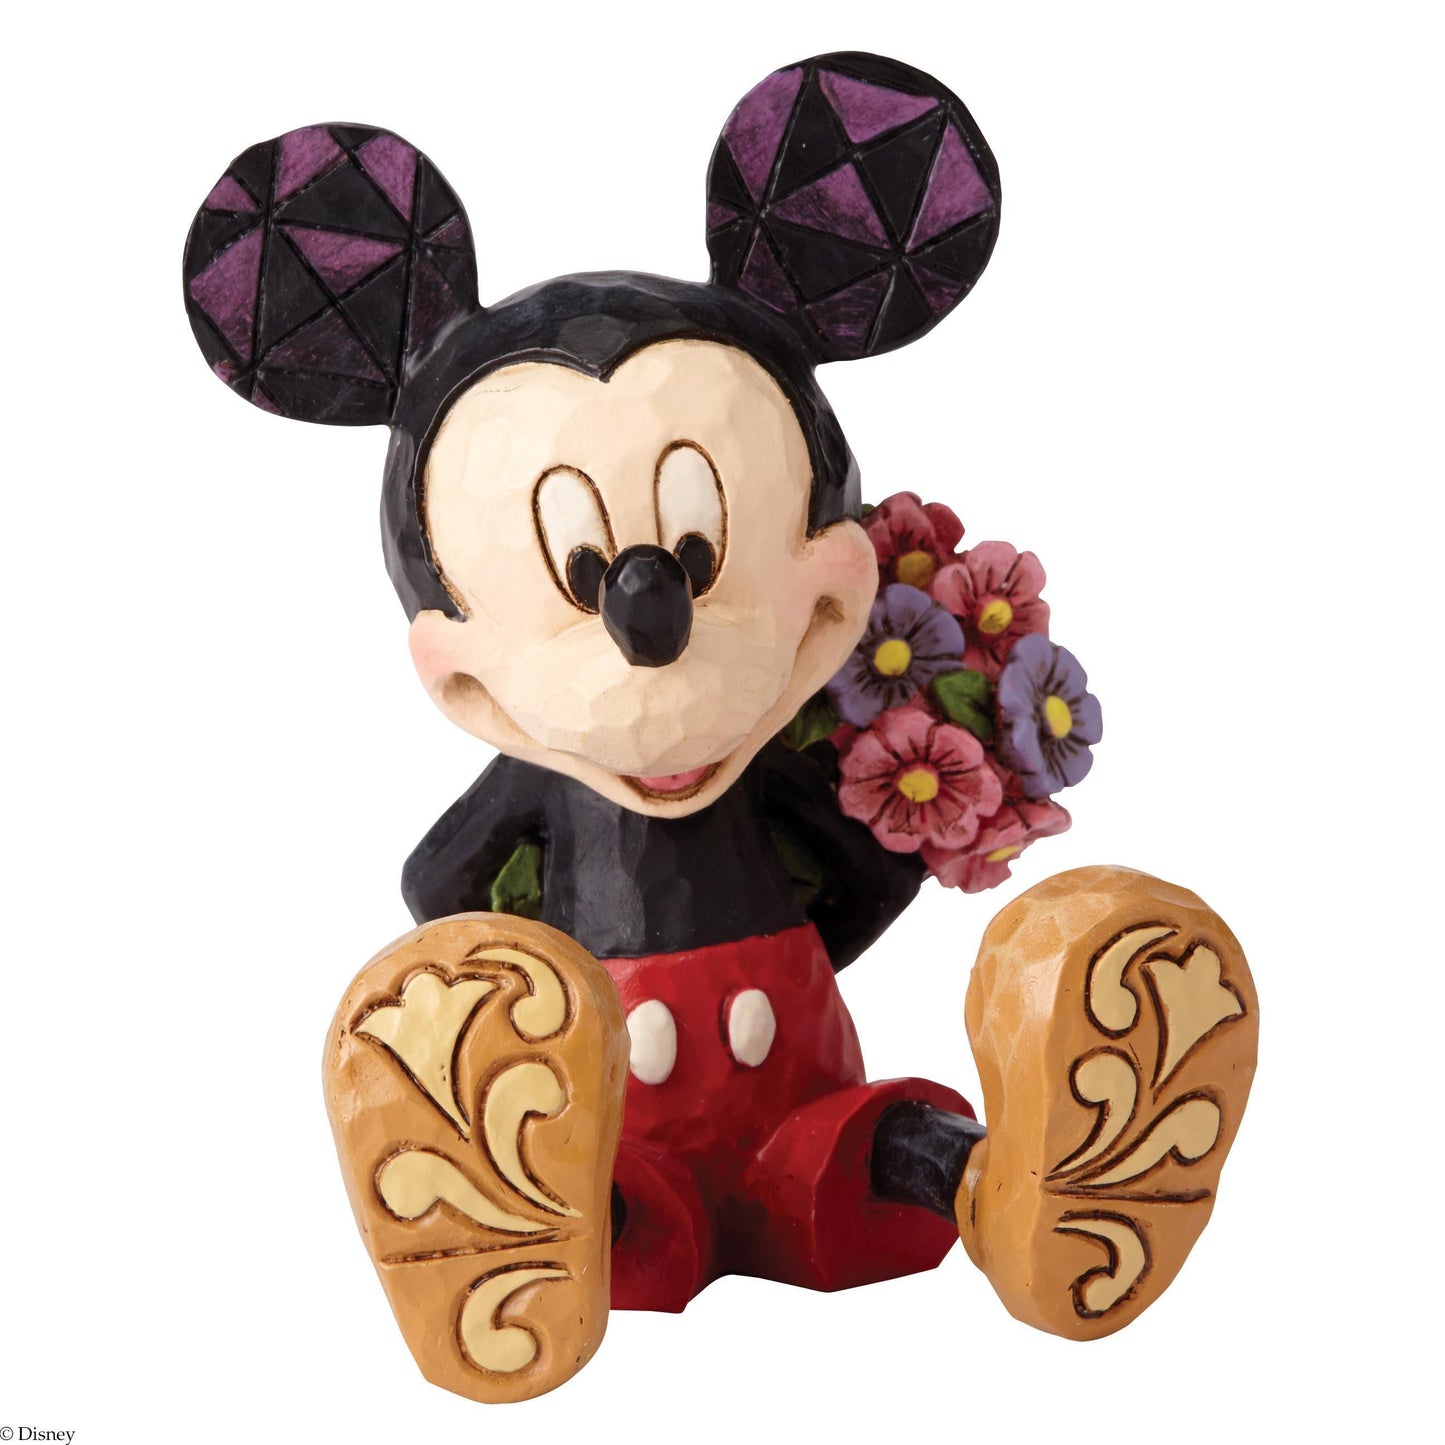 Mickey Mouse with Flowers Mini Figurine (Disney Traditions by Jim Shore) - Gallery Gifts Online 